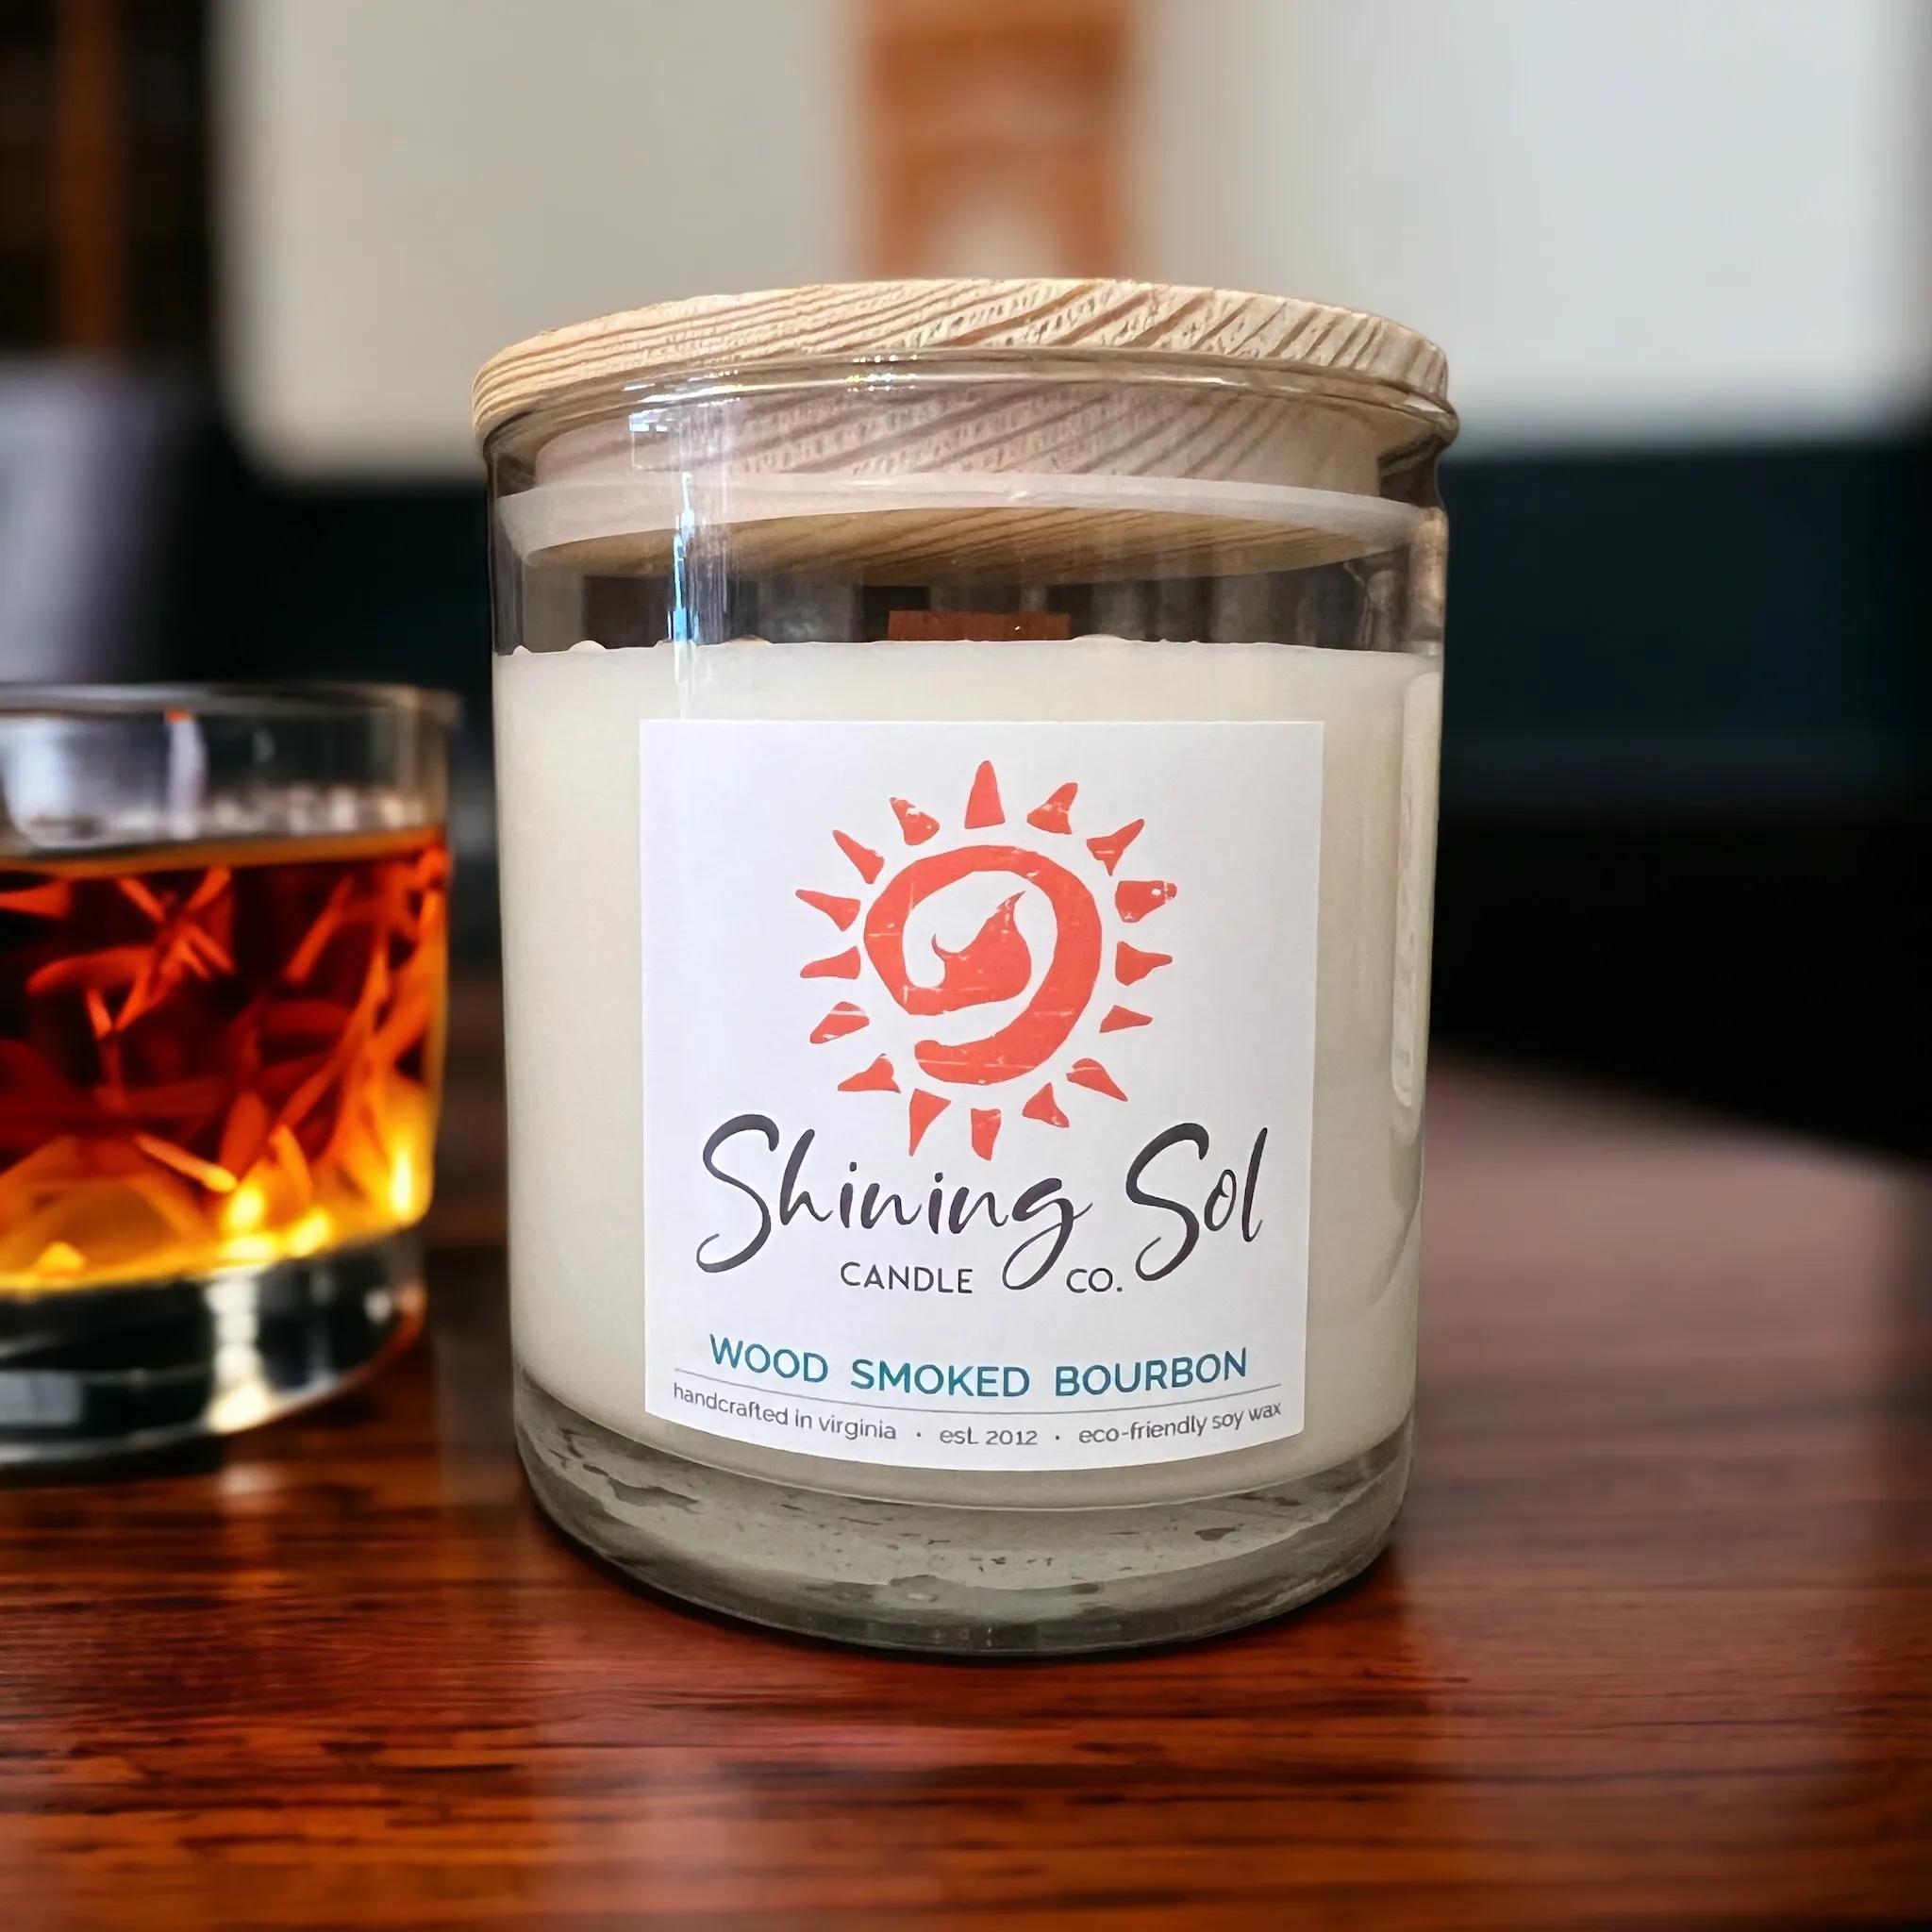 smoked bourbon candle - Can you use bourbon to scent candles